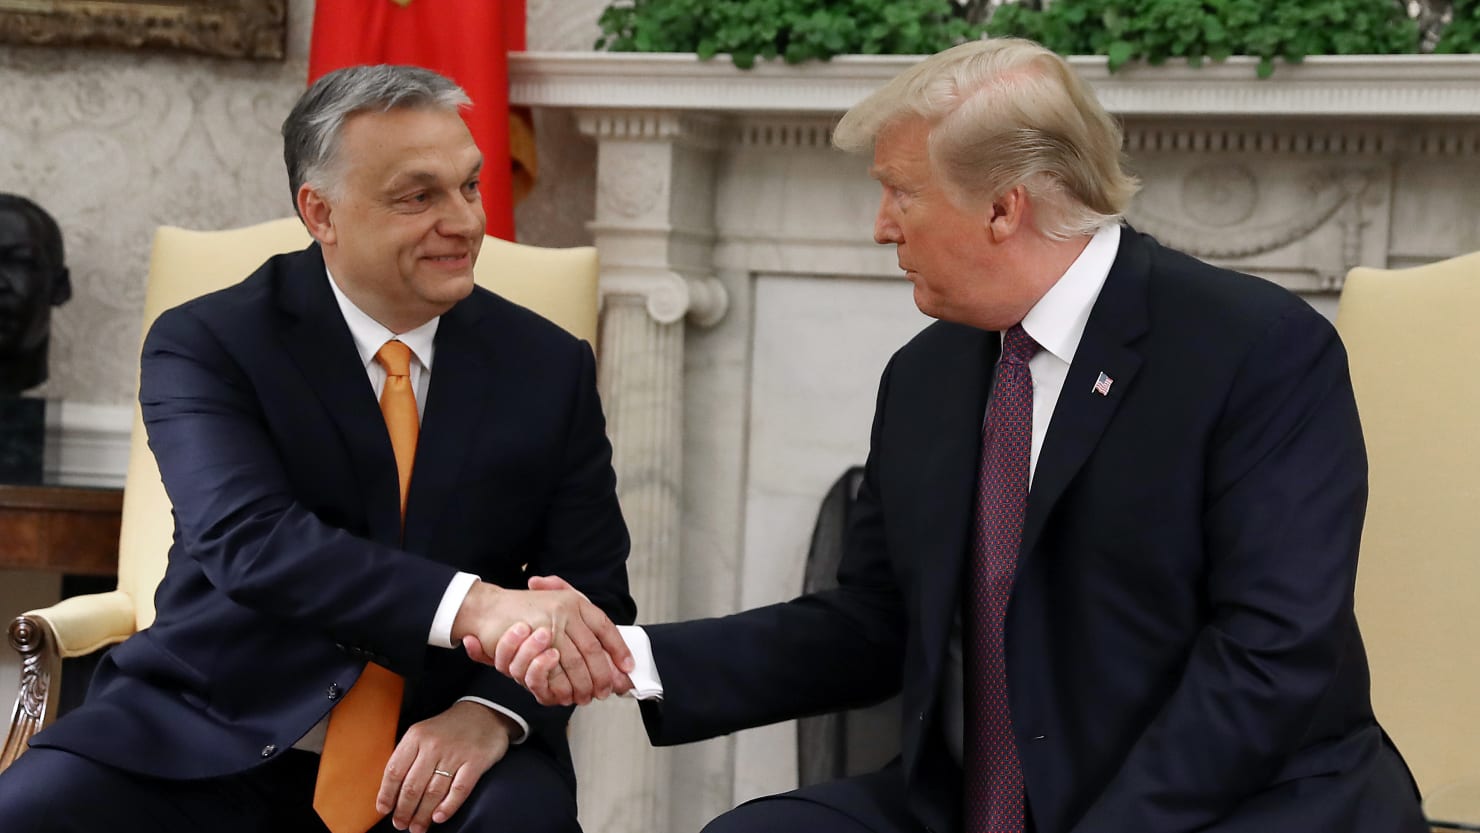 Donald Trump Allegedly Plans to Cut Off Aid to Ukraine if Elected in 2024, Hungarian PM Claims